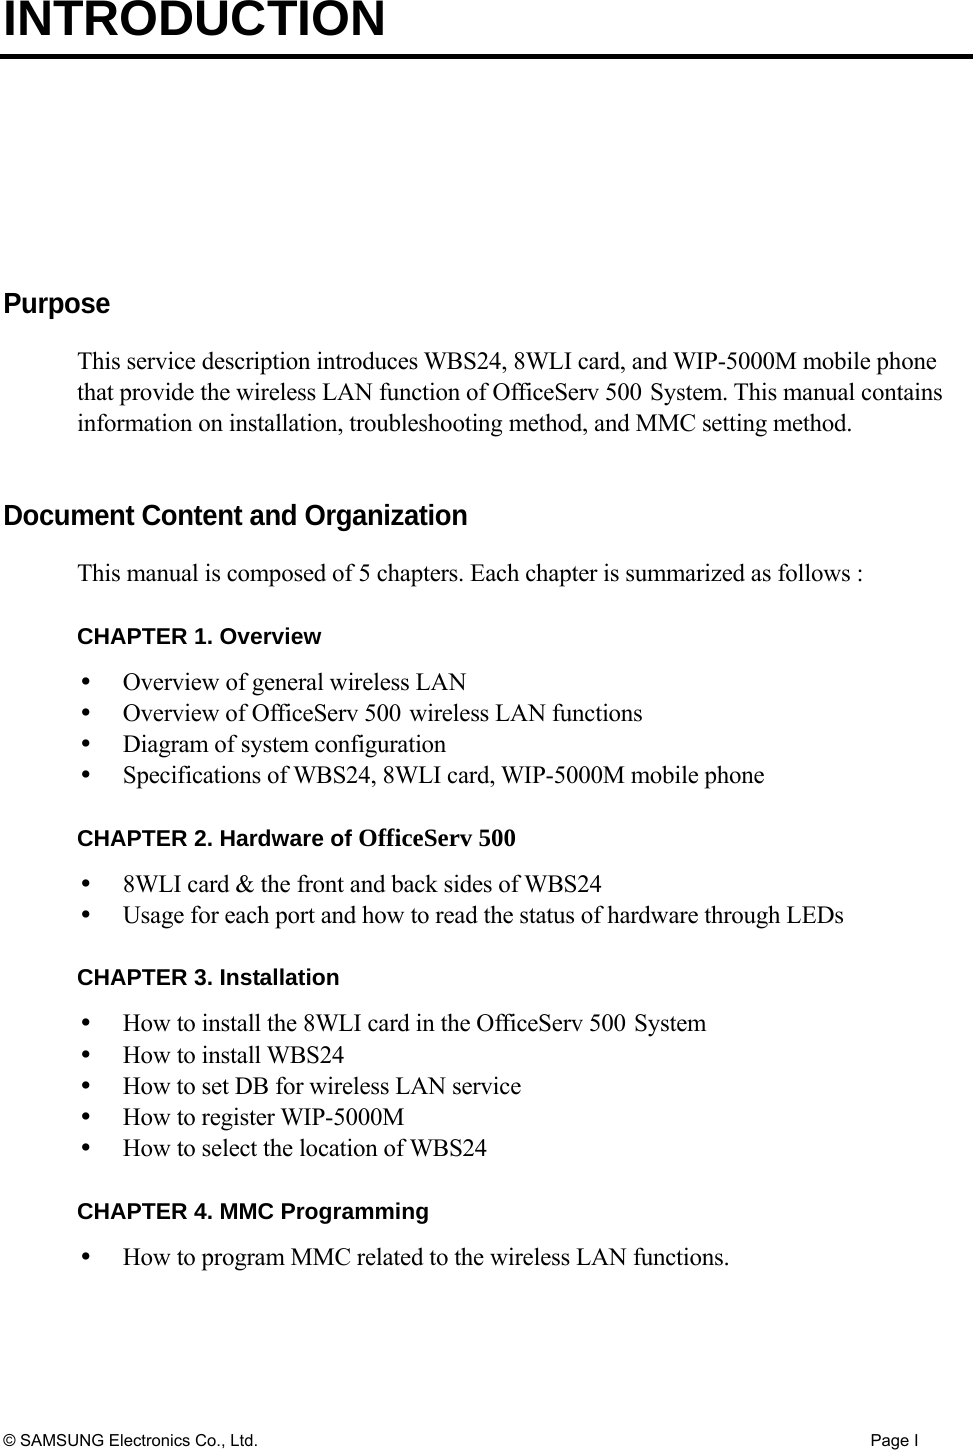 INTRODUCTION © SAMSUNG Electronics Co., Ltd.  Page I  Purpose This service description introduces WBS24, 8WLI card, and WIP-5000M mobile phone that provide the wireless LAN function of OfficeServ 500 System. This manual contains information on installation, troubleshooting method, and MMC setting method.     Document Content and Organization This manual is composed of 5 chapters. Each chapter is summarized as follows :    CHAPTER 1. Overview     Overview of general wireless LAN   Overview of OfficeServ 500 wireless LAN functions   Diagram of system configuration   Specifications of WBS24, 8WLI card, WIP-5000M mobile phone  CHAPTER 2. Hardware of OfficeServ 500   8WLI card &amp; the front and back sides of WBS24   Usage for each port and how to read the status of hardware through LEDs  CHAPTER 3. Installation   How to install the 8WLI card in the OfficeServ 500 System   How to install WBS24   How to set DB for wireless LAN service   How to register WIP-5000M   How to select the location of WBS24  CHAPTER 4. MMC Programming   How to program MMC related to the wireless LAN functions.   